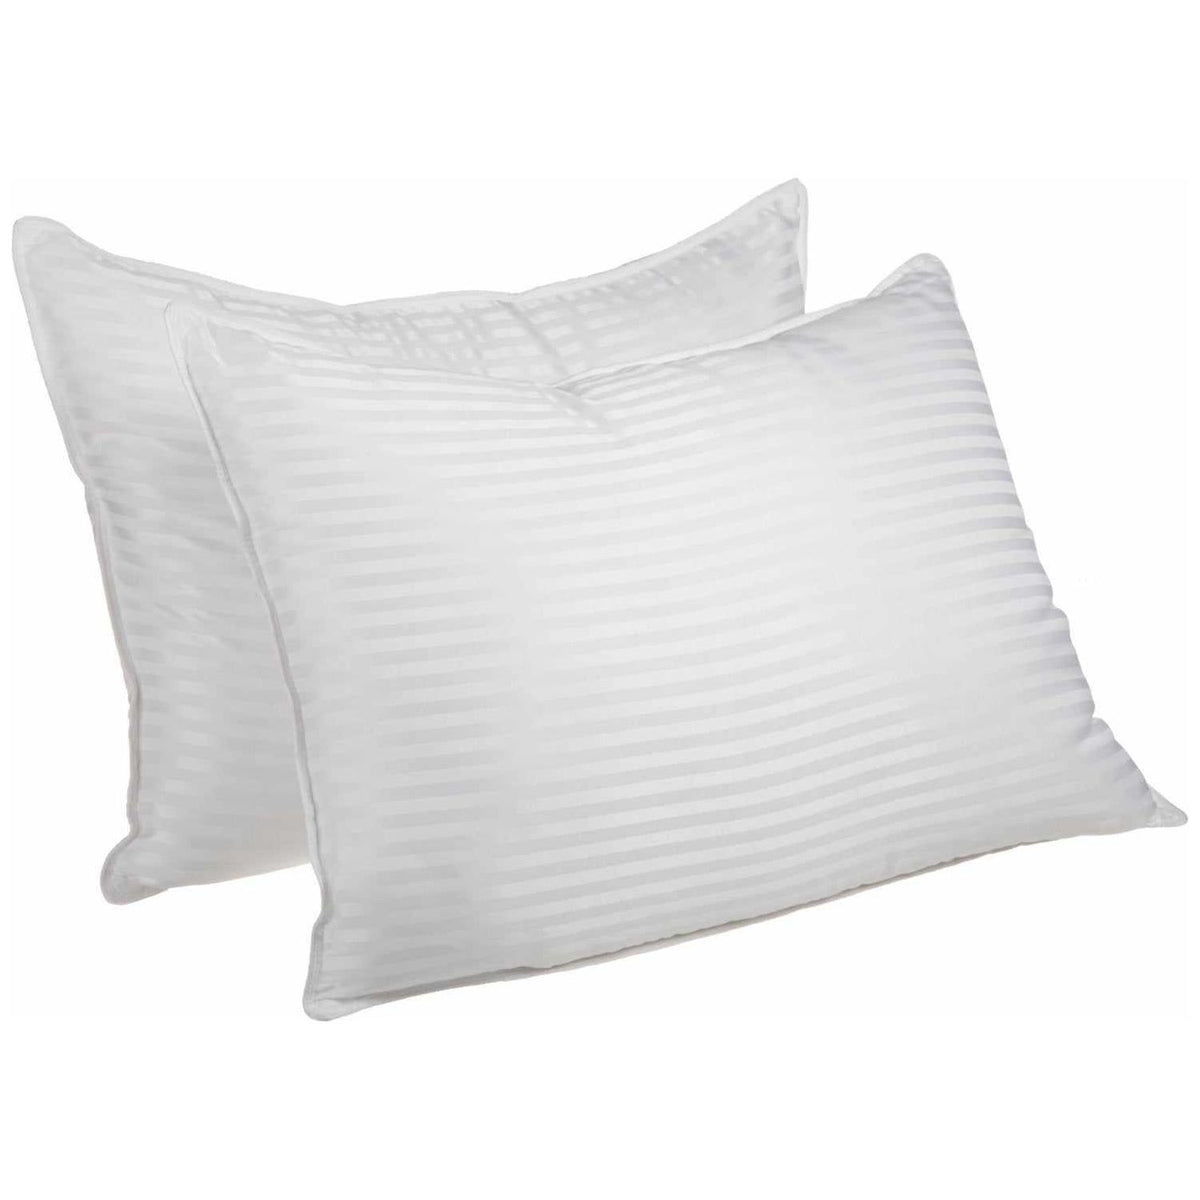 Striped Microfiber and Down Alternative Pillow - Set of 2 - White